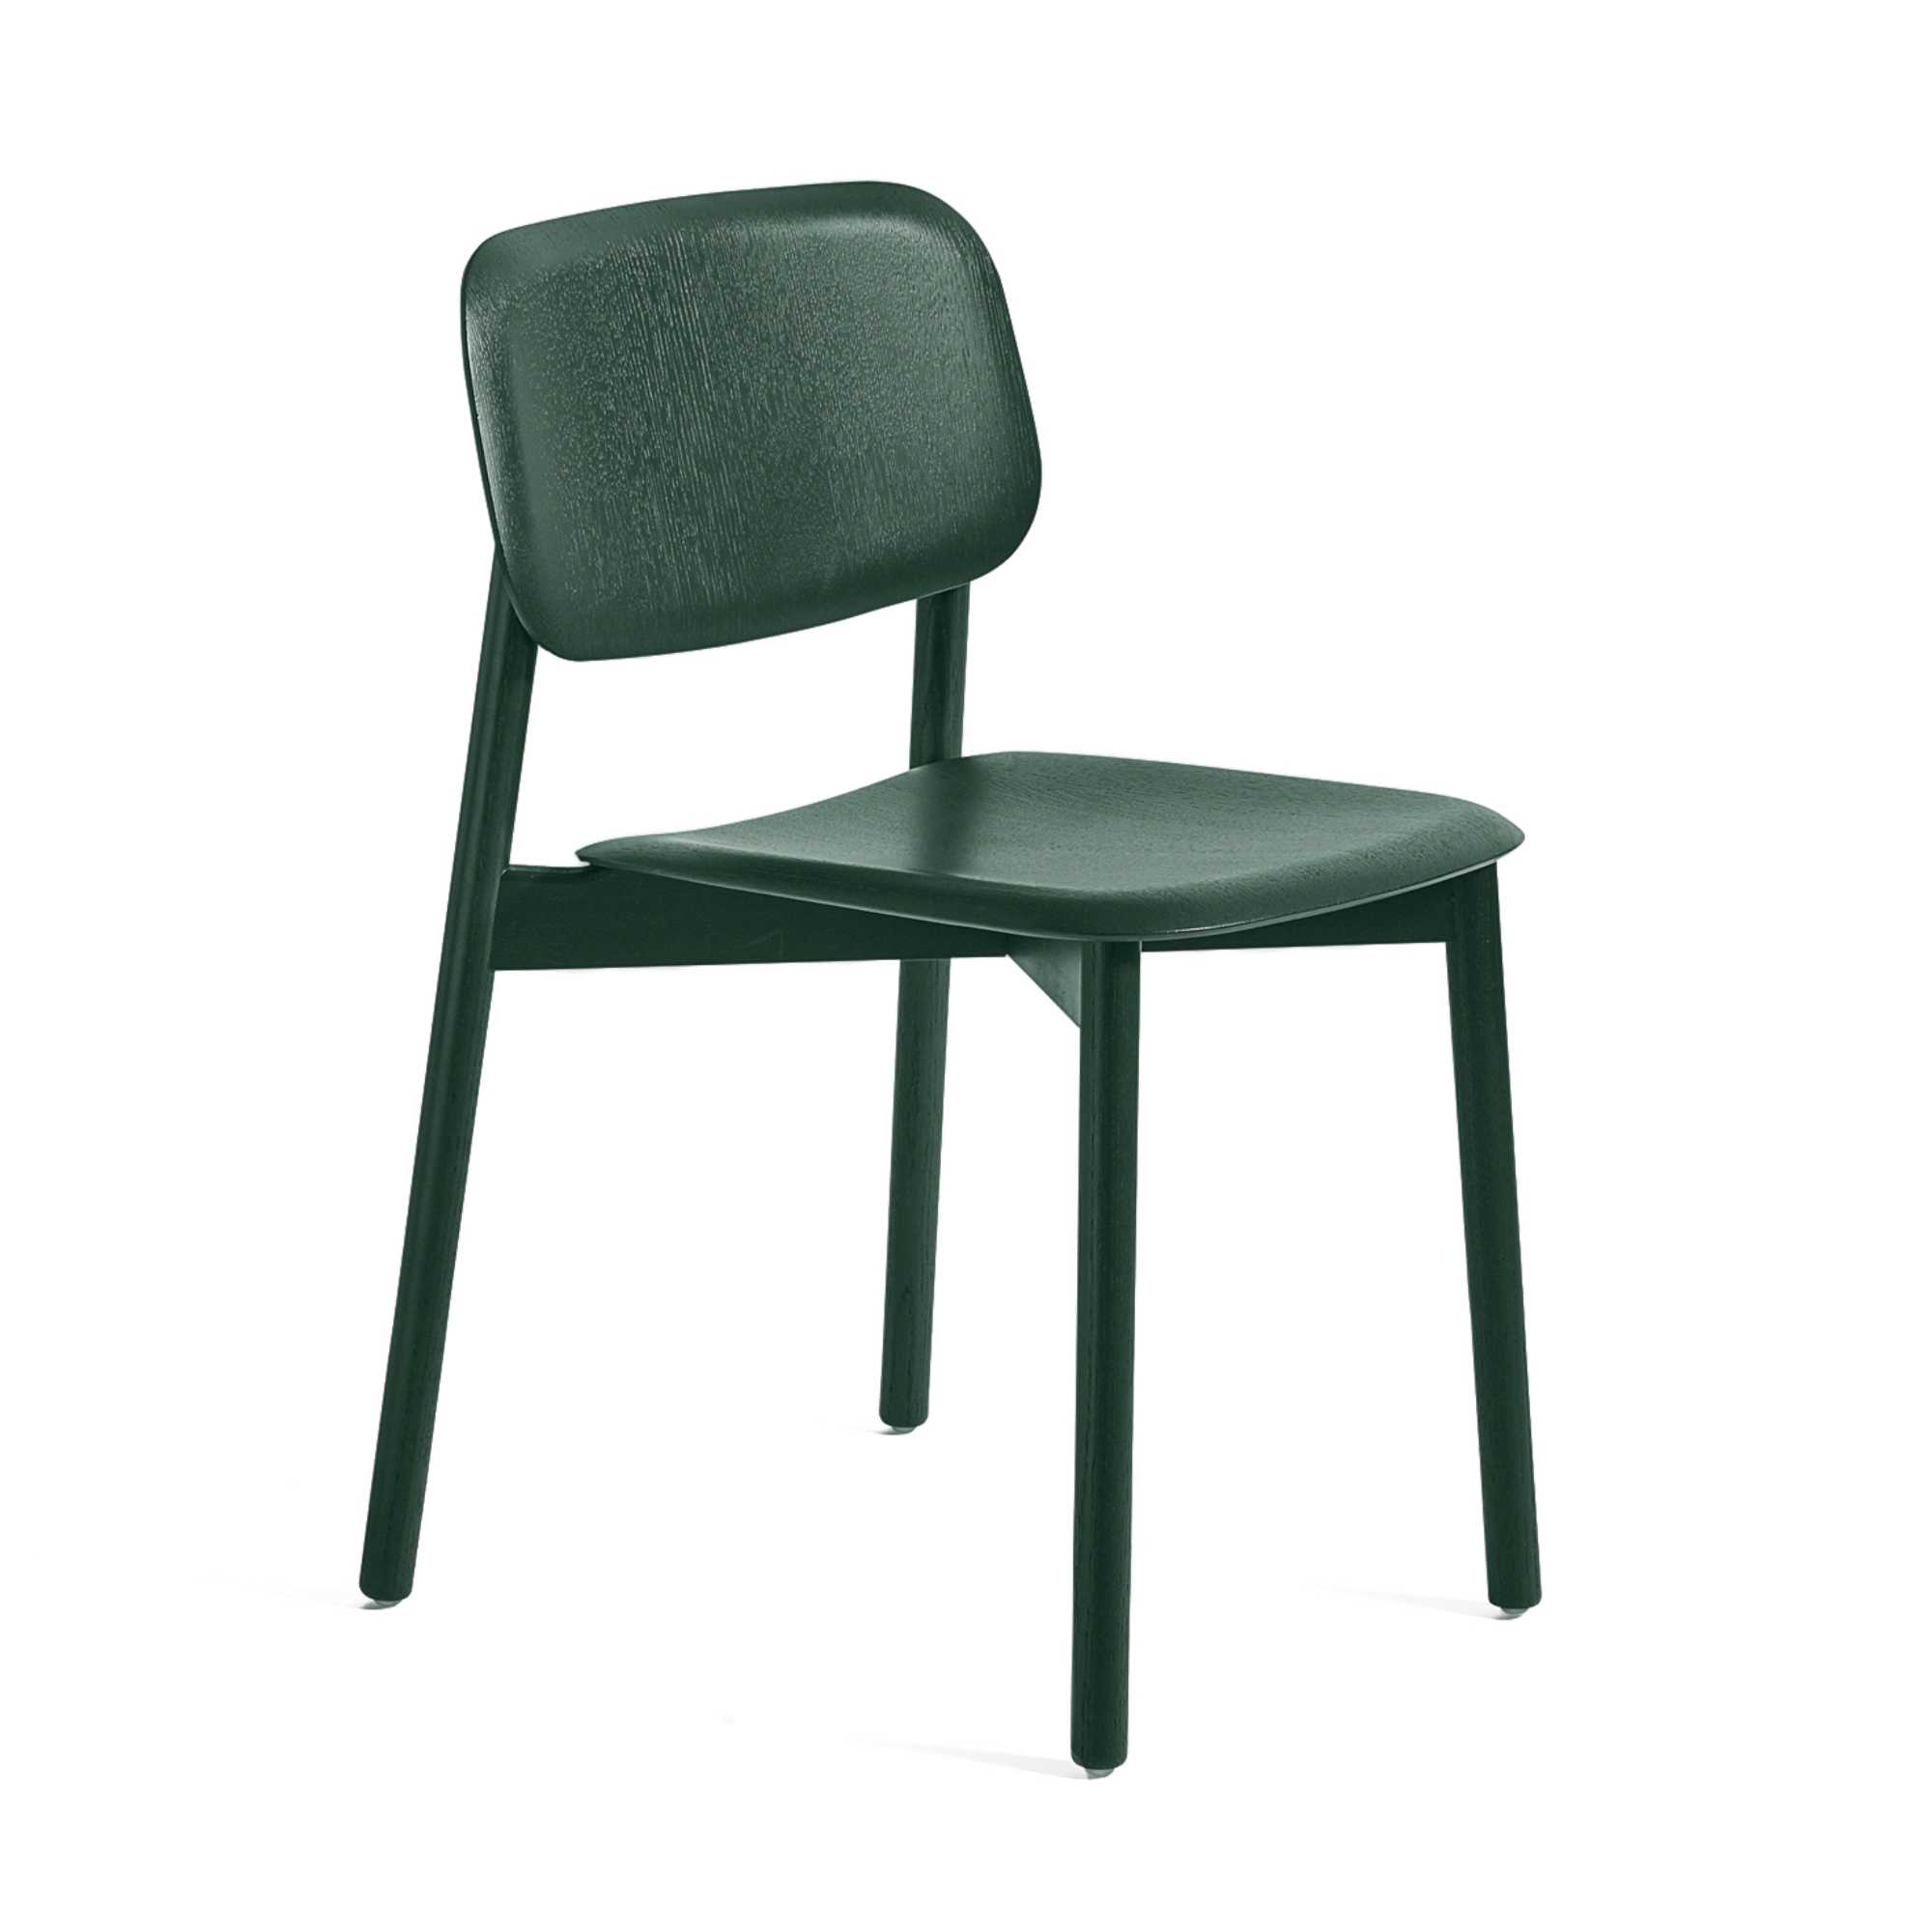 Hay Soft Edge 12 Chair, Lacquered Hunter